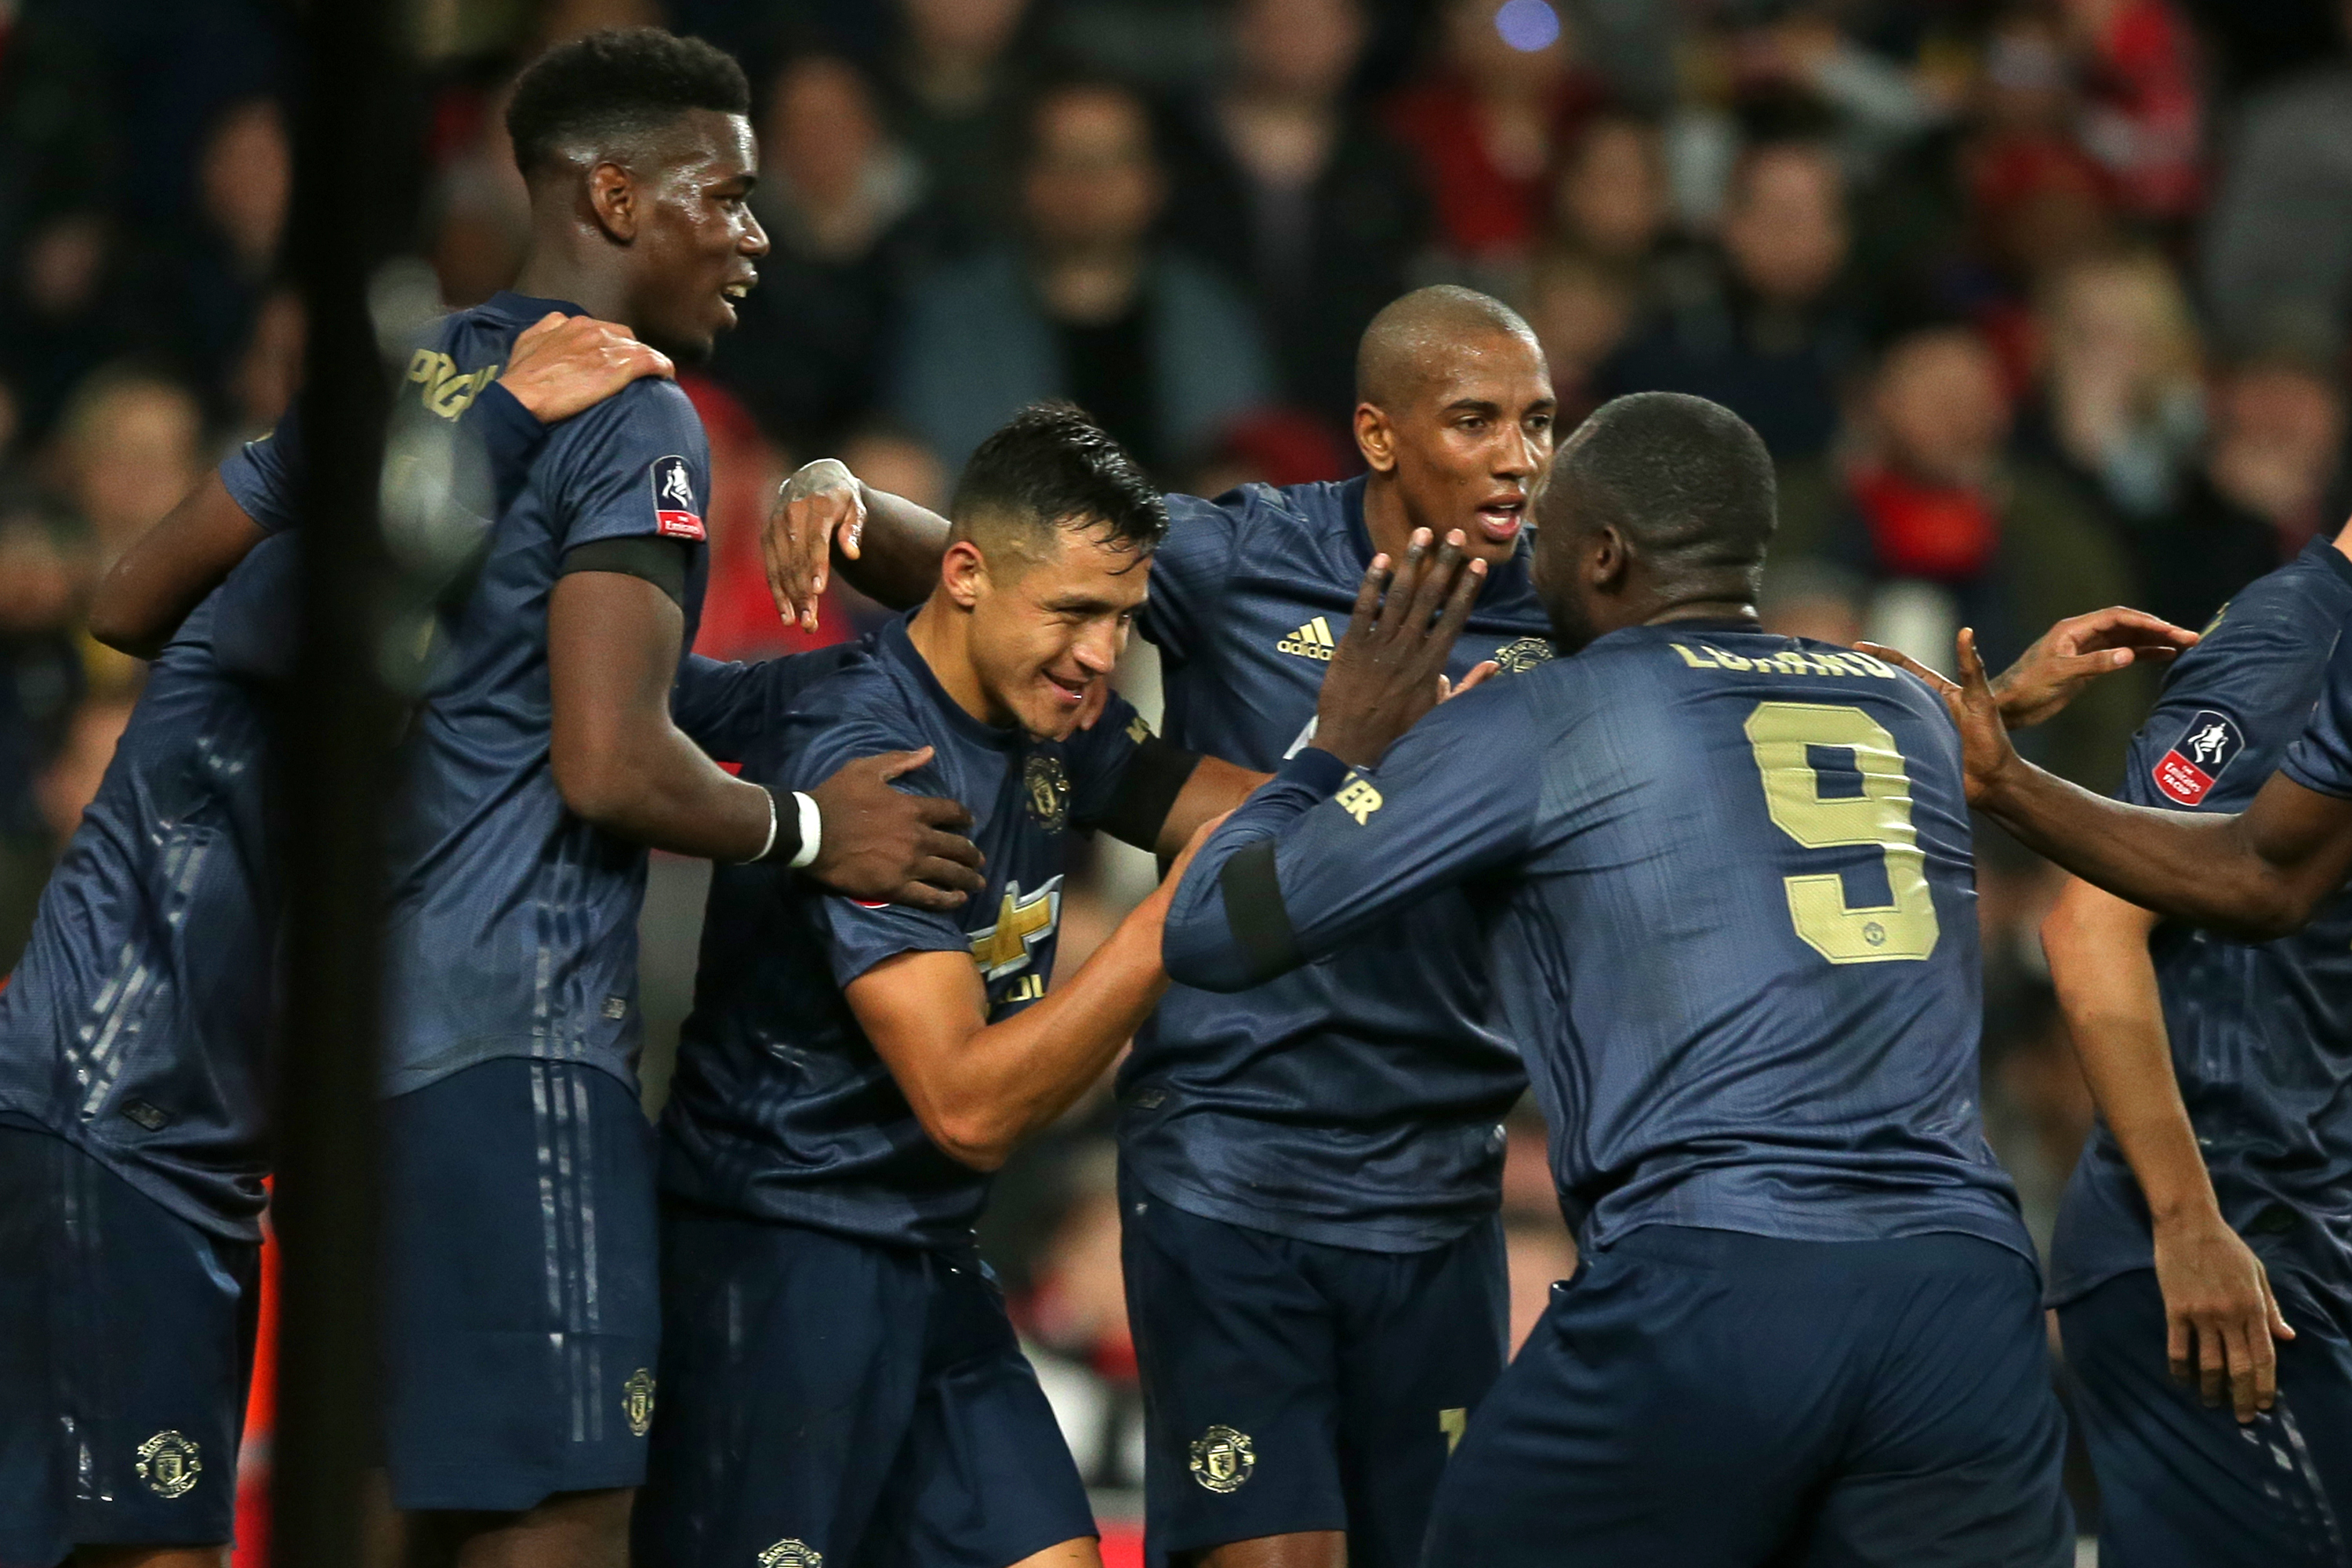 Manchester United's Chilean striker Alexis Sanchez (C) celebrates with teammates after scoring the opening goal of the English FA Cup fourth round football match between Arsenal and Manchester United at the Emirates Stadium in London on January 25, 2019. (Photo by Daniel LEAL-OLIVAS / AFP) / RESTRICTED TO EDITORIAL USE. No use with unauthorized audio, video, data, fixture lists, club/league logos or 'live' services. Online in-match use limited to 120 images. An additional 40 images may be used in extra time. No video emulation. Social media in-match use limited to 120 images. An additional 40 images may be used in extra time. No use in betting publications, games or single club/league/player publications. /         (Photo credit should read DANIEL LEAL-OLIVAS/AFP/Getty Images)